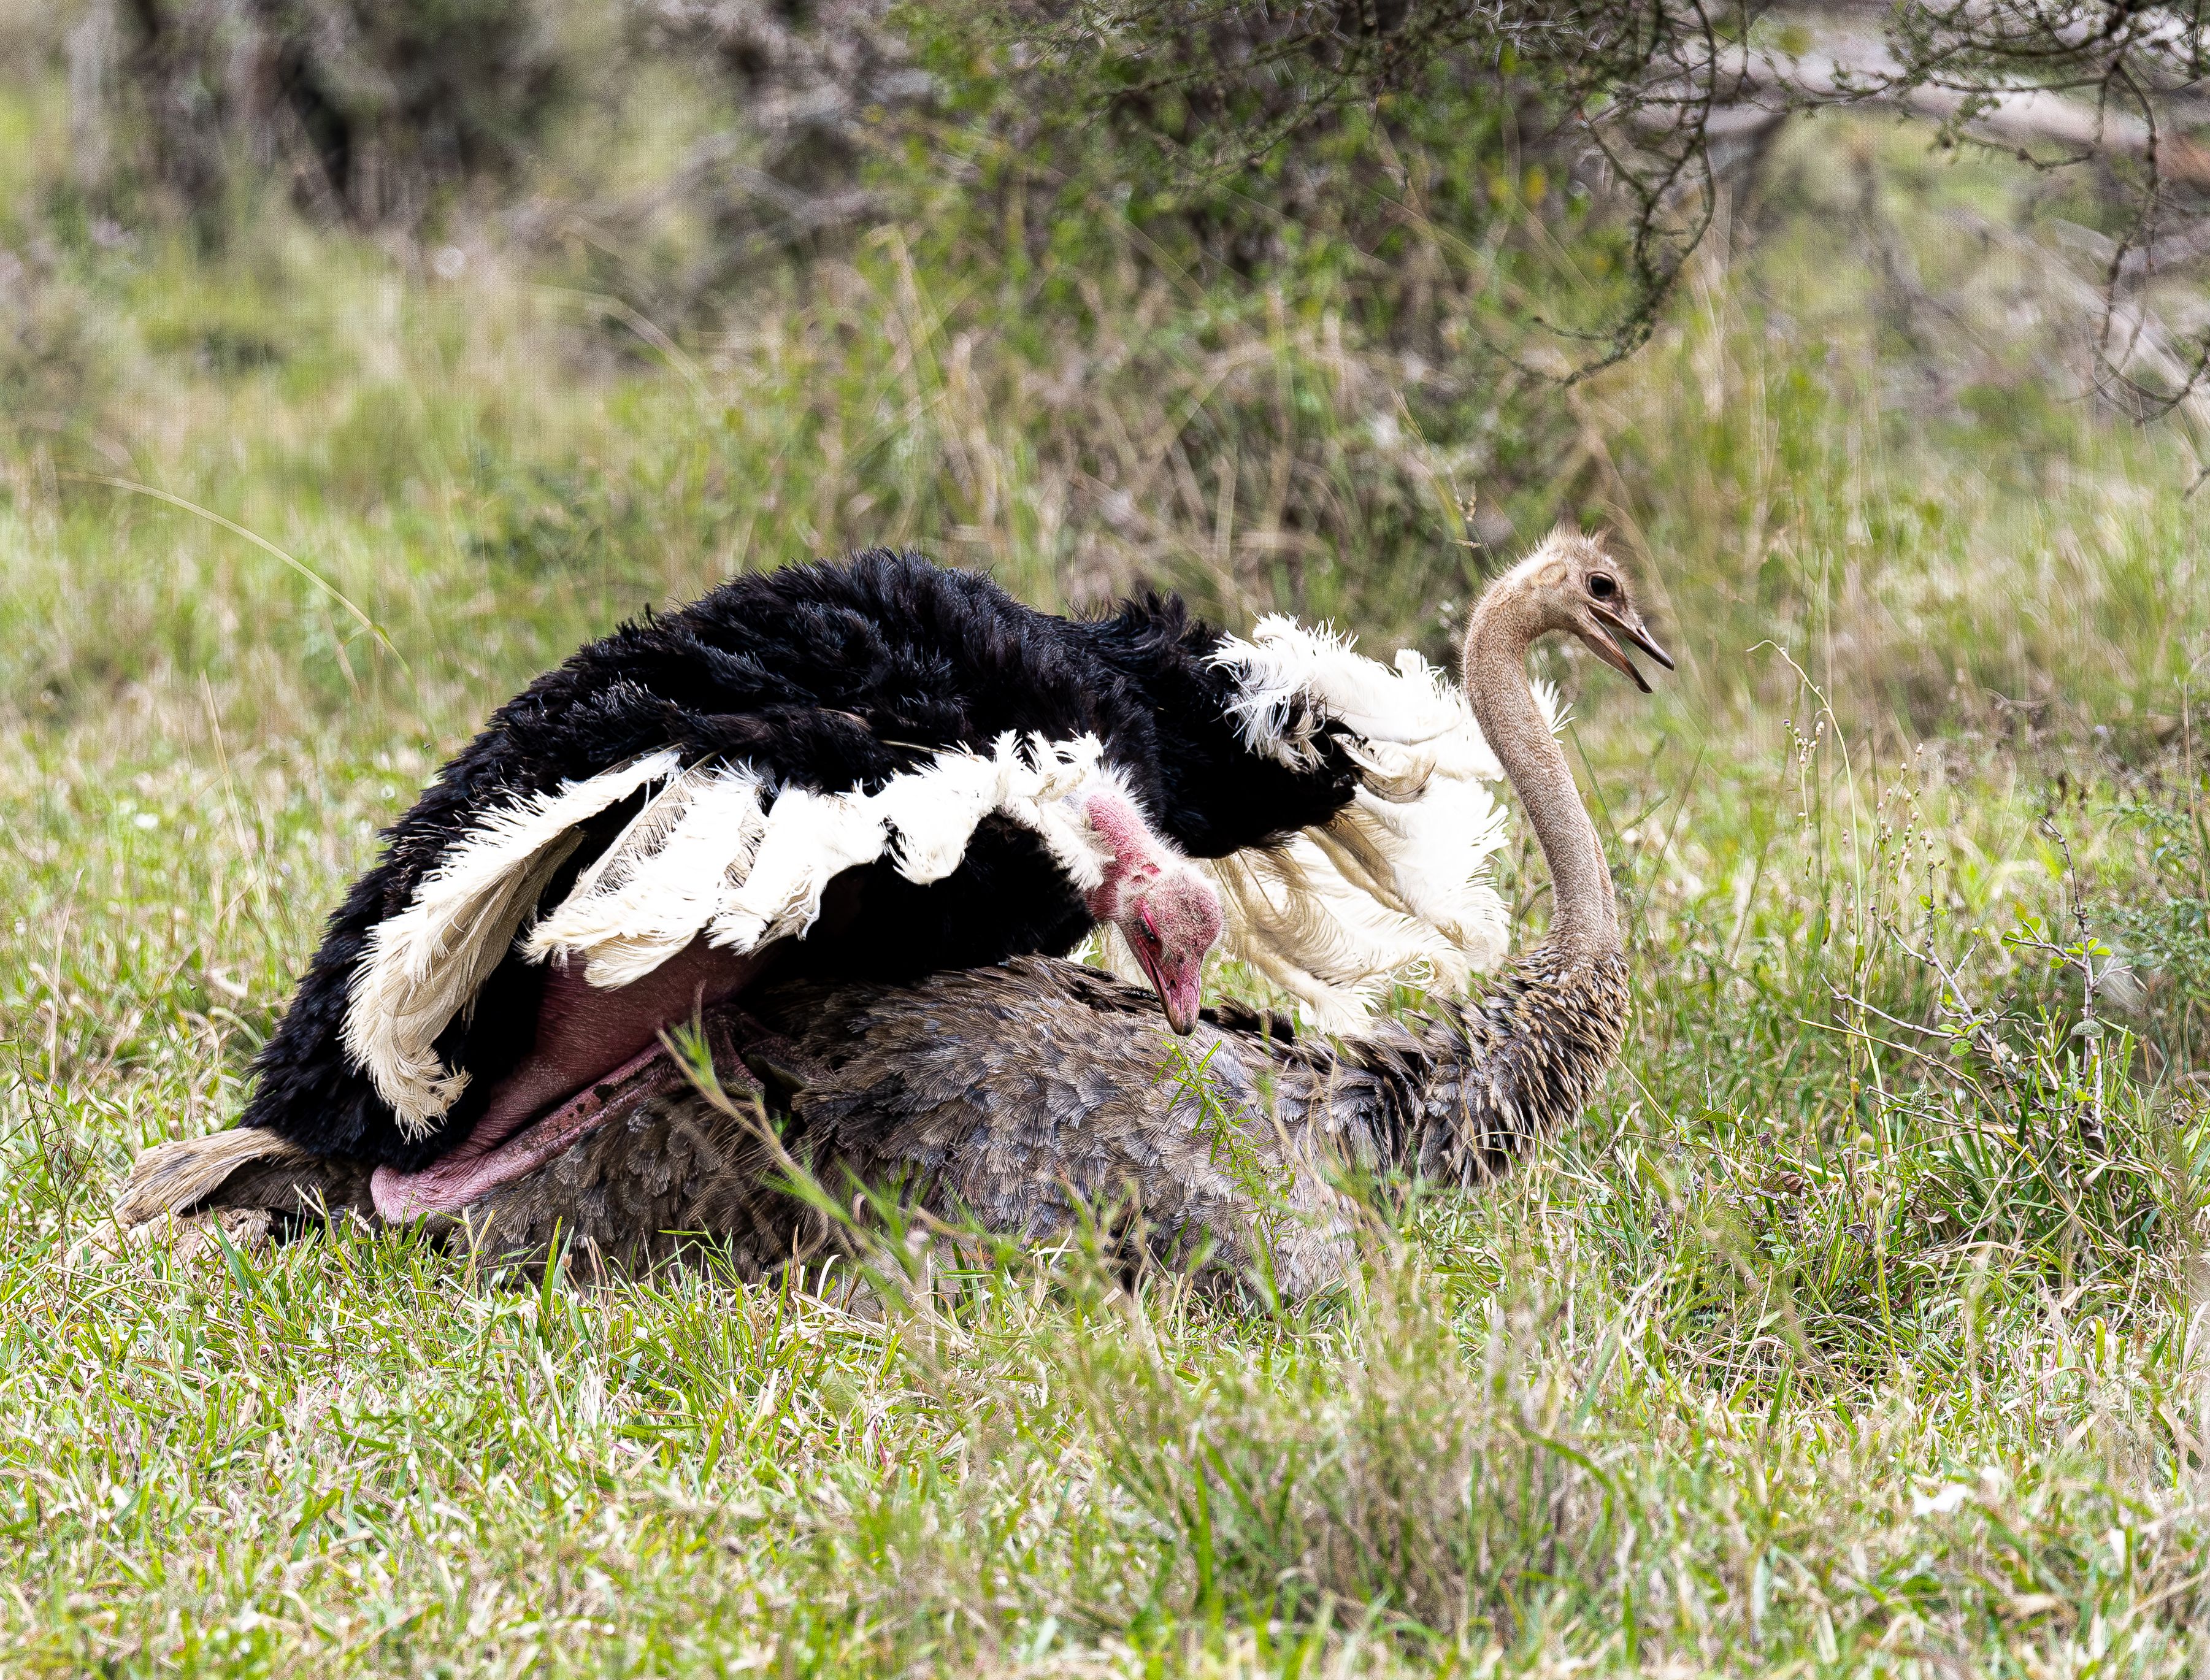 Ostrich in throes of mating